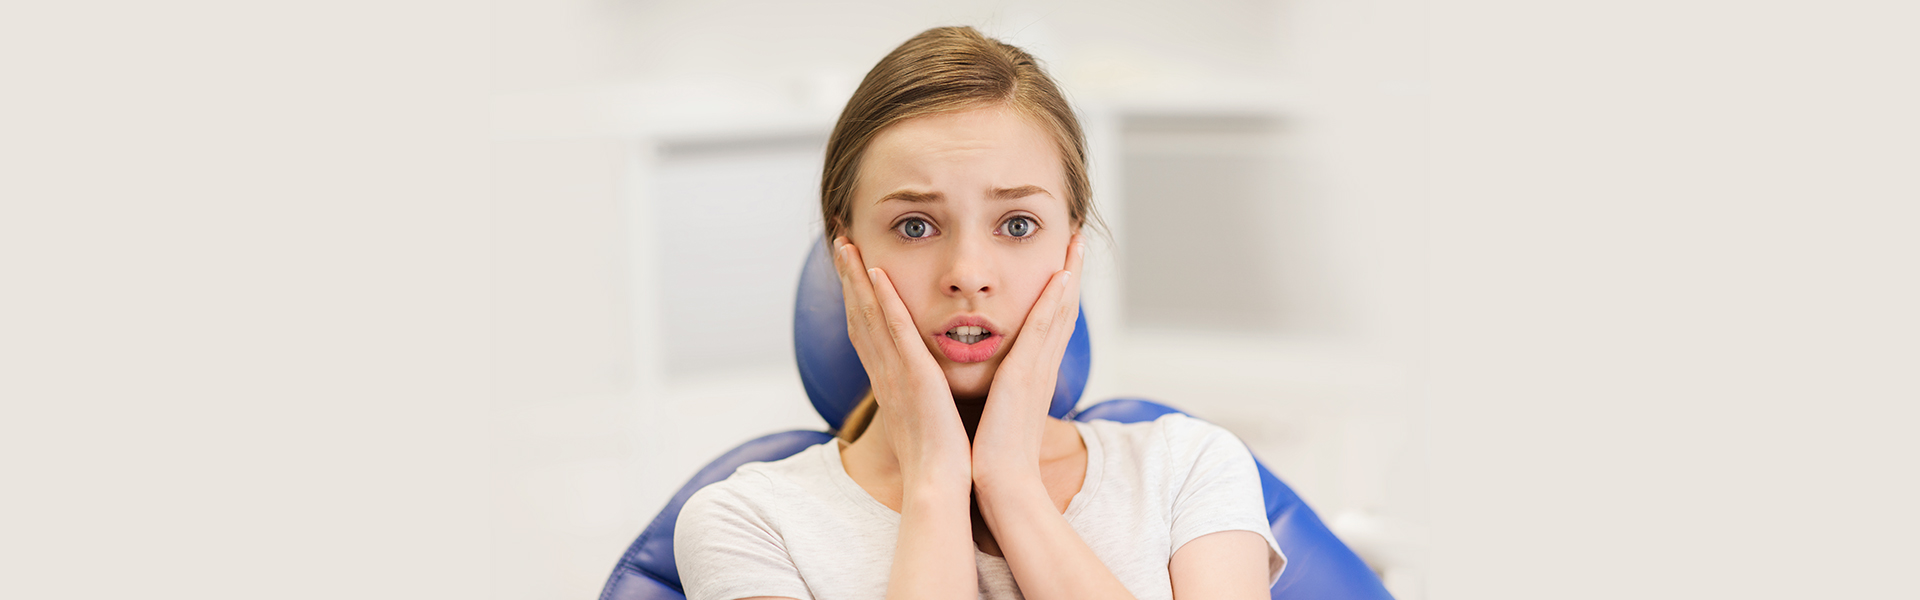 Facts You Need to Know About Dental Anxiety and Phobia and How to Combat Them